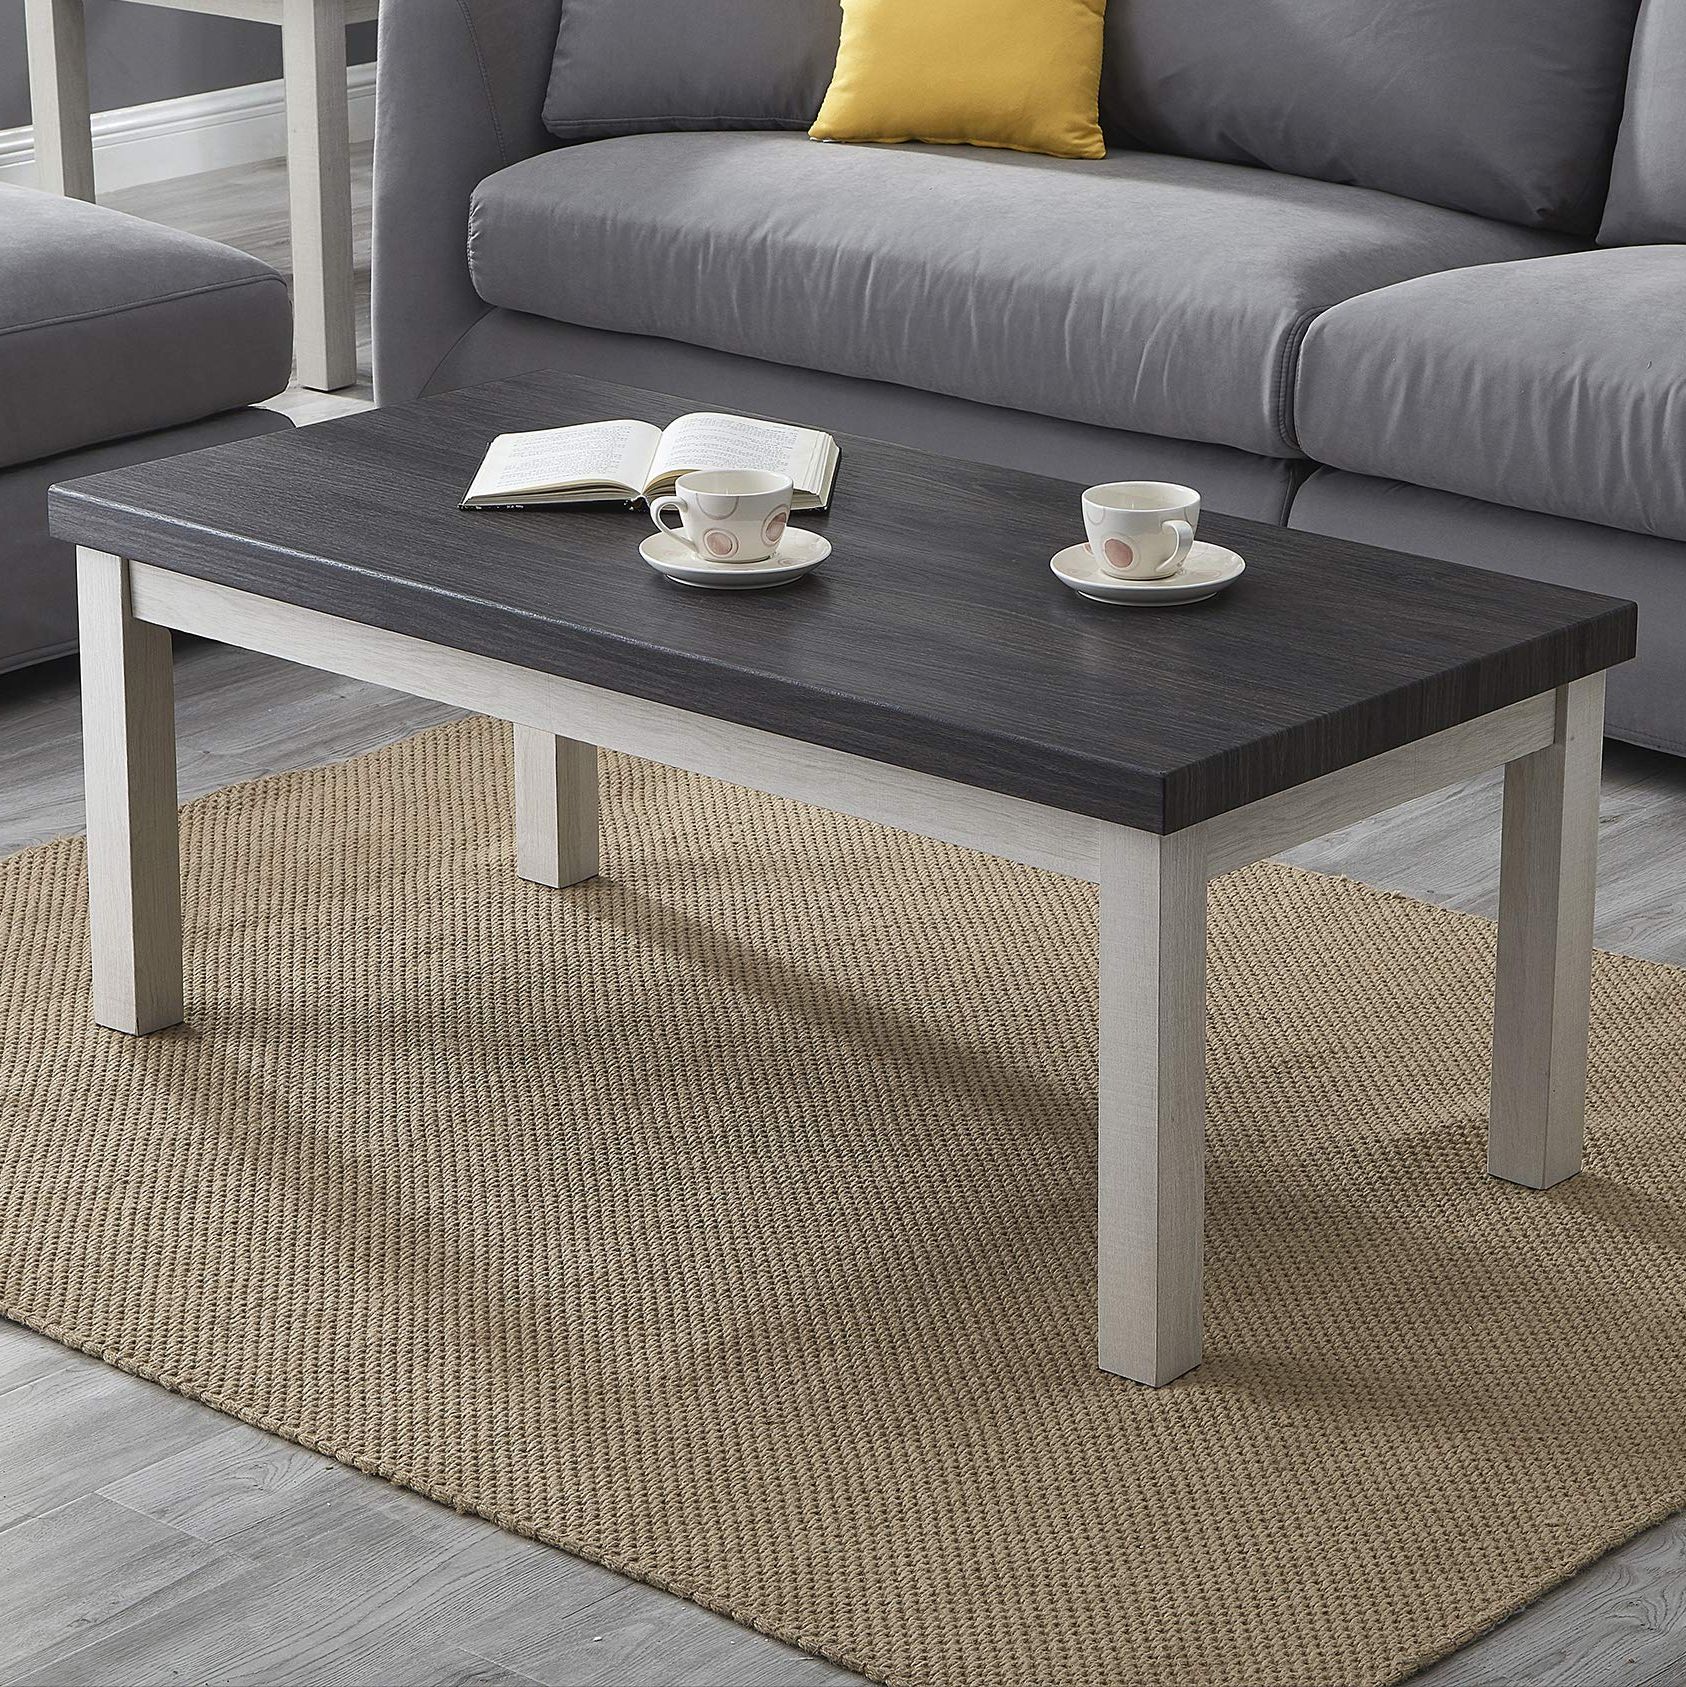 Pemberly Row Replicated Wood Coffee Tables Regarding Favorite Amazon: Roundhill Furniture Ronan Two Tone Wood Rectangle Coffee Table,  Gray : Home & Kitchen (Photo 6 of 10)